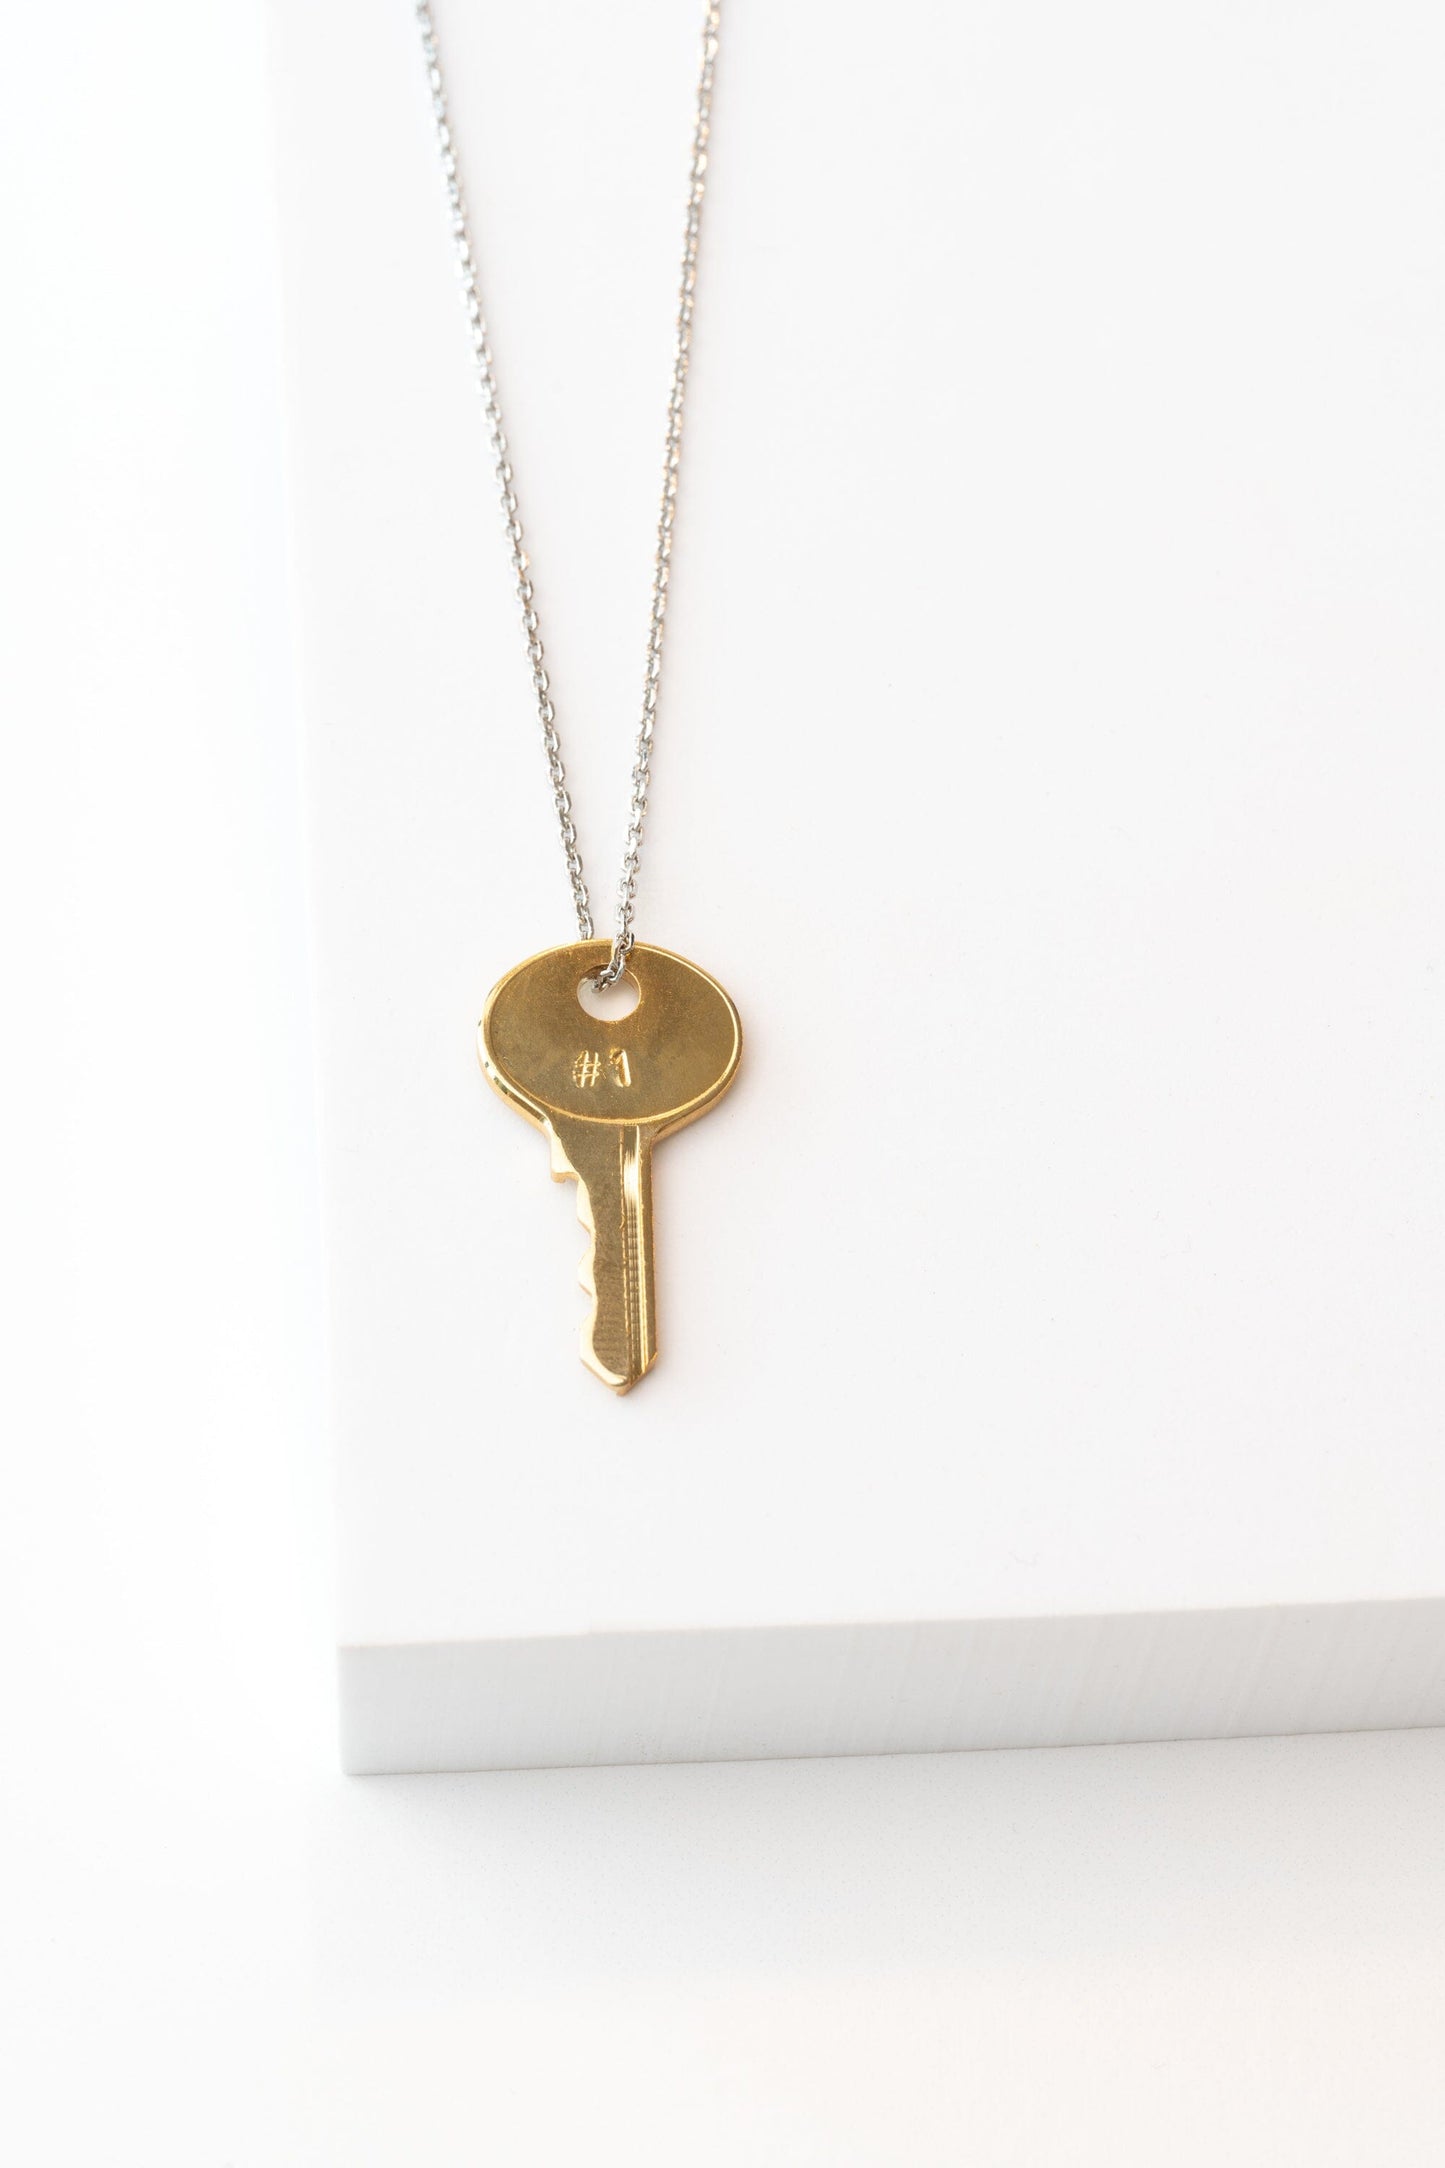 THE ONE Dainty Key Necklace Necklaces The Giving Keys 